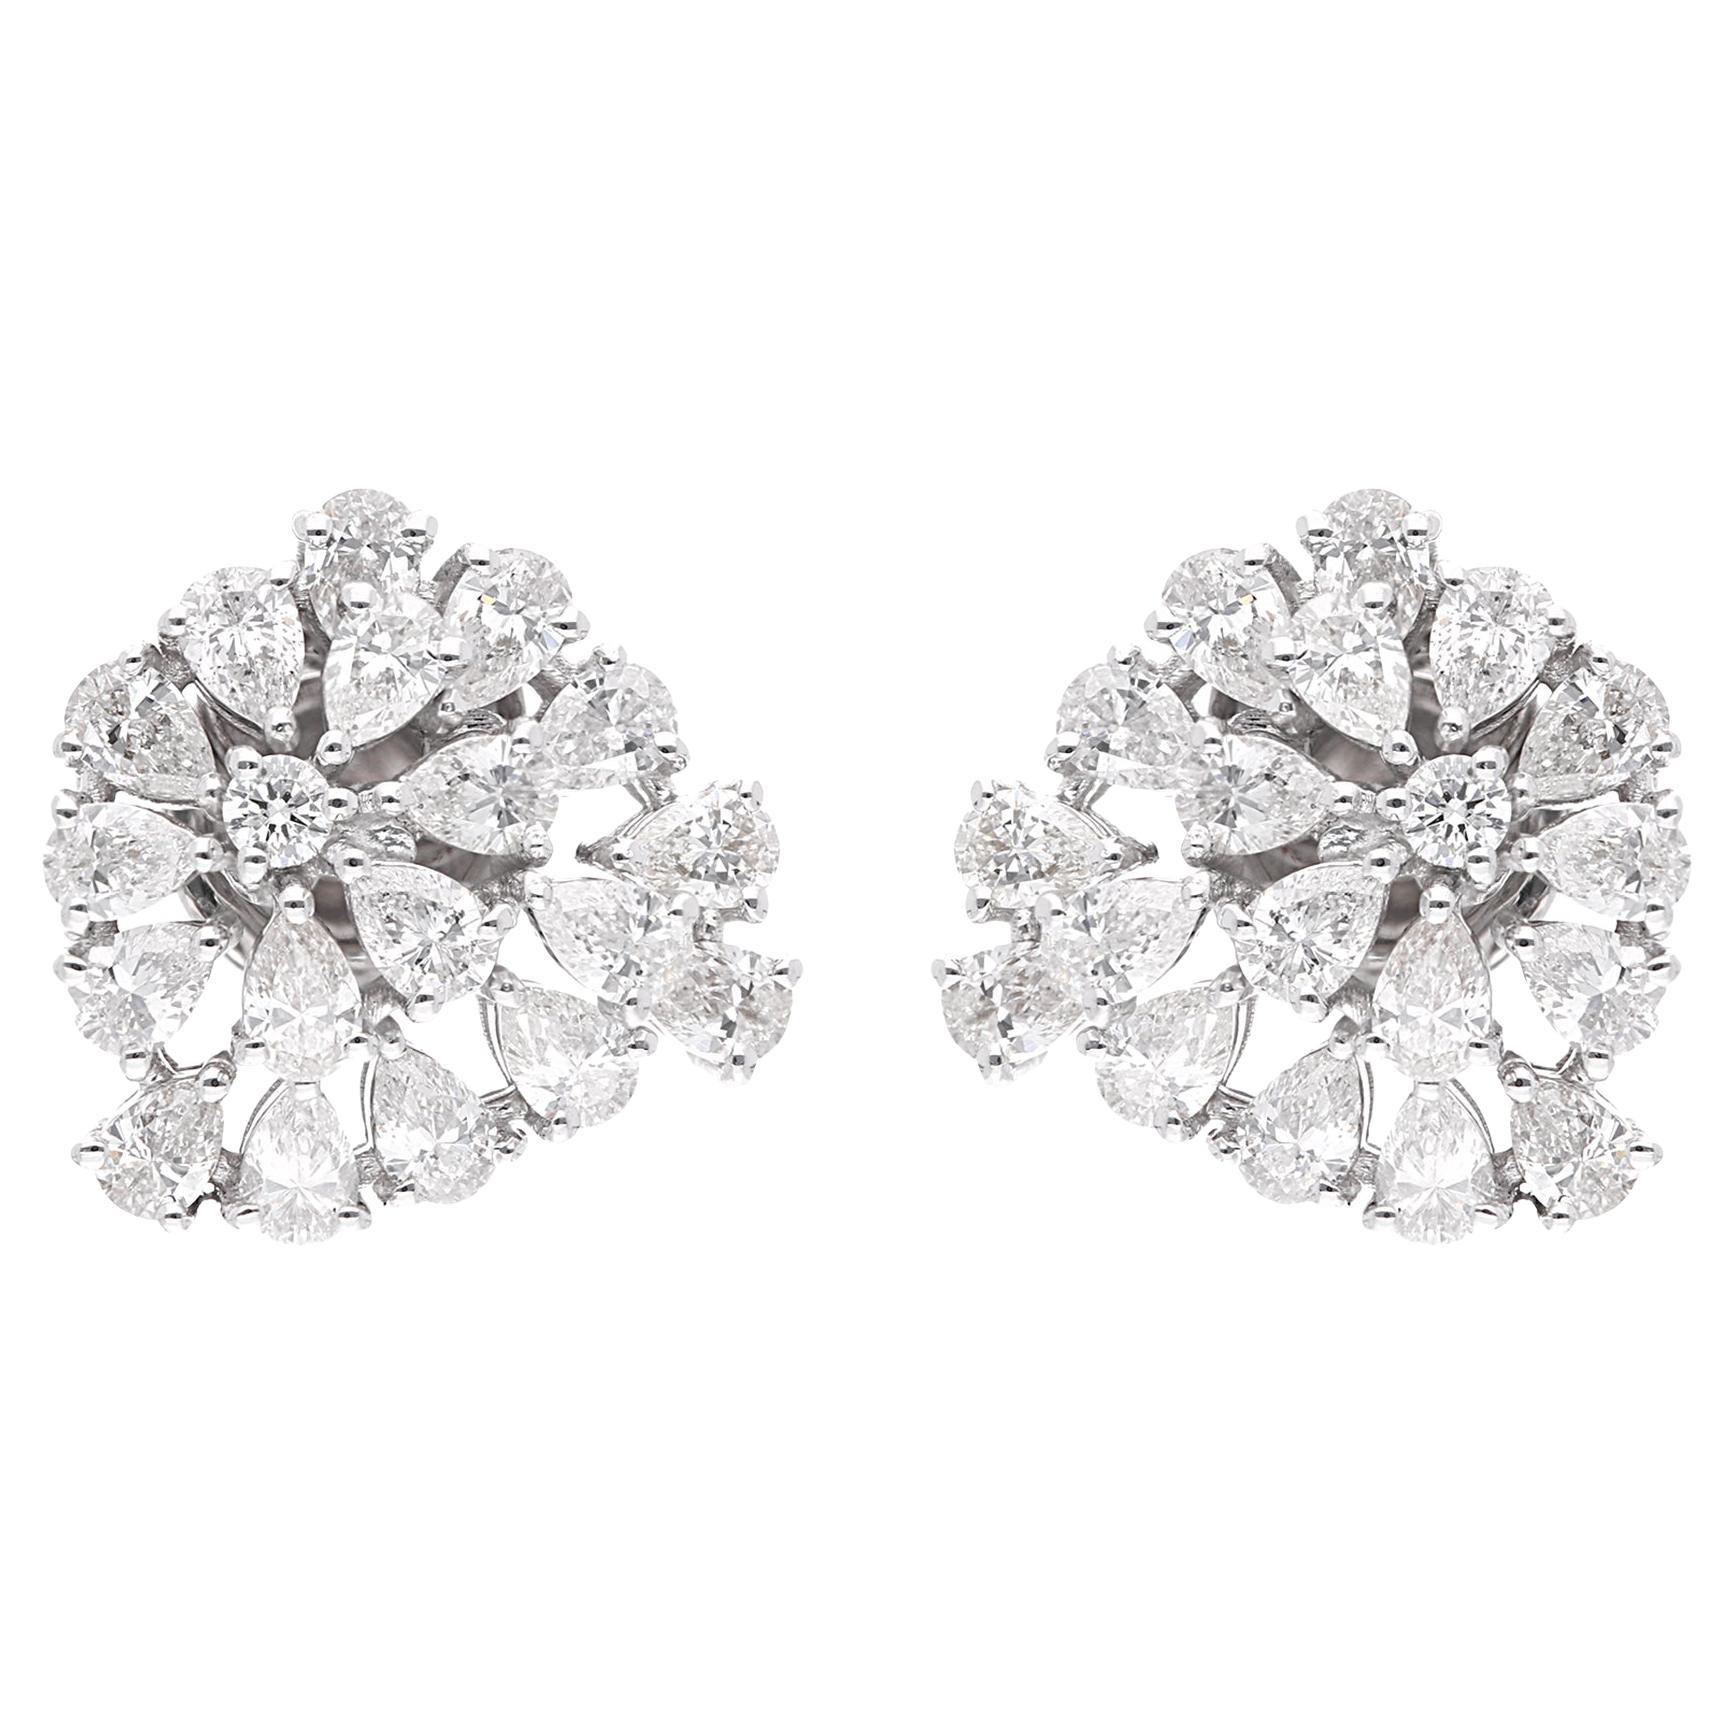 2.20 Ct SI Clarity HI Color Pear Round Diamond Stud Earrings 18 Karat White Gold For Sale